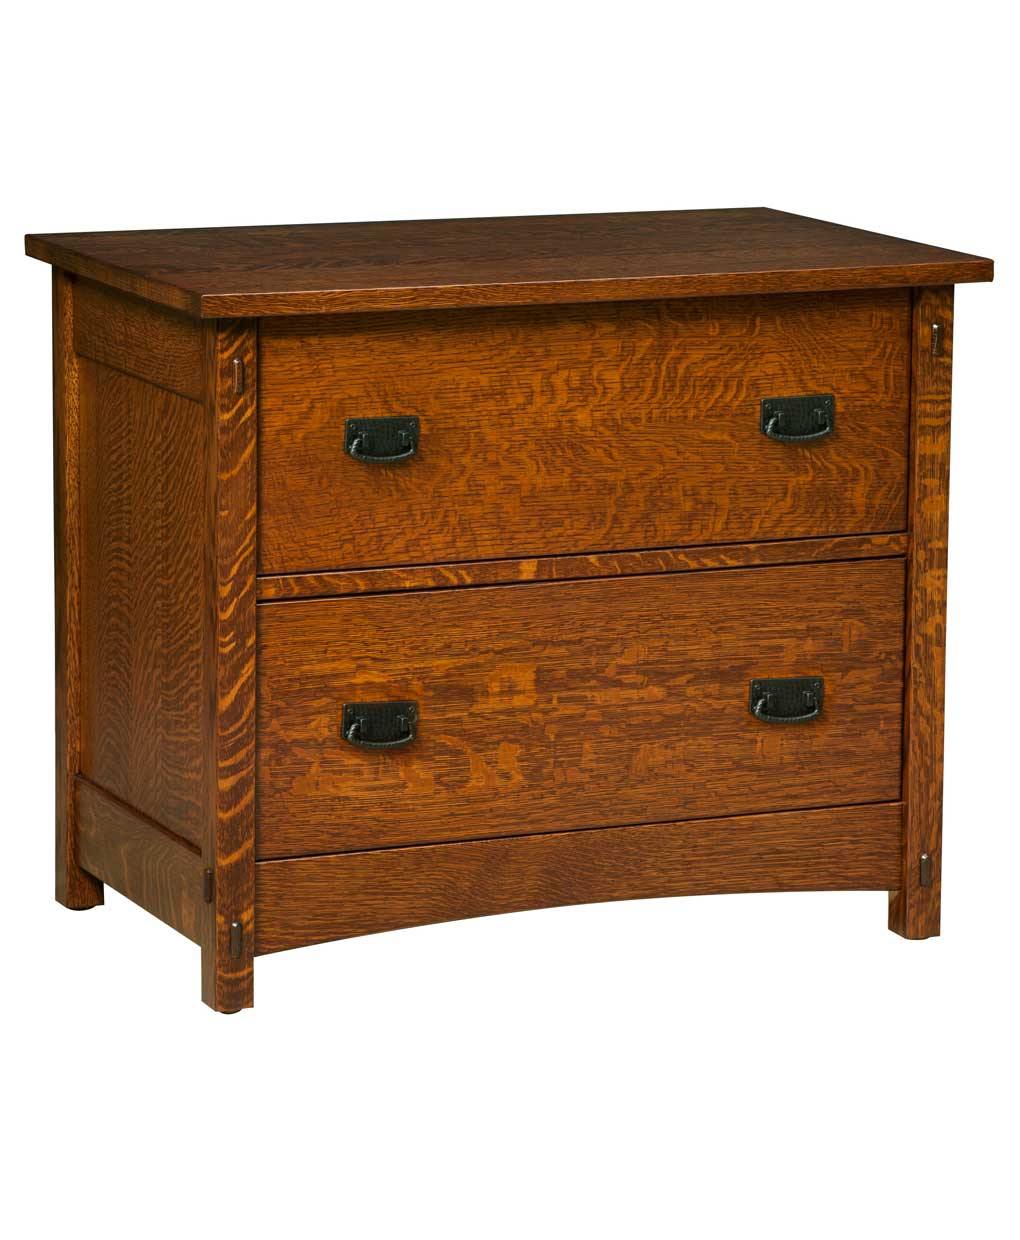 Signature Mission Lateral File Cabinet Amish Direct Furniture within measurements 1020 X 1240